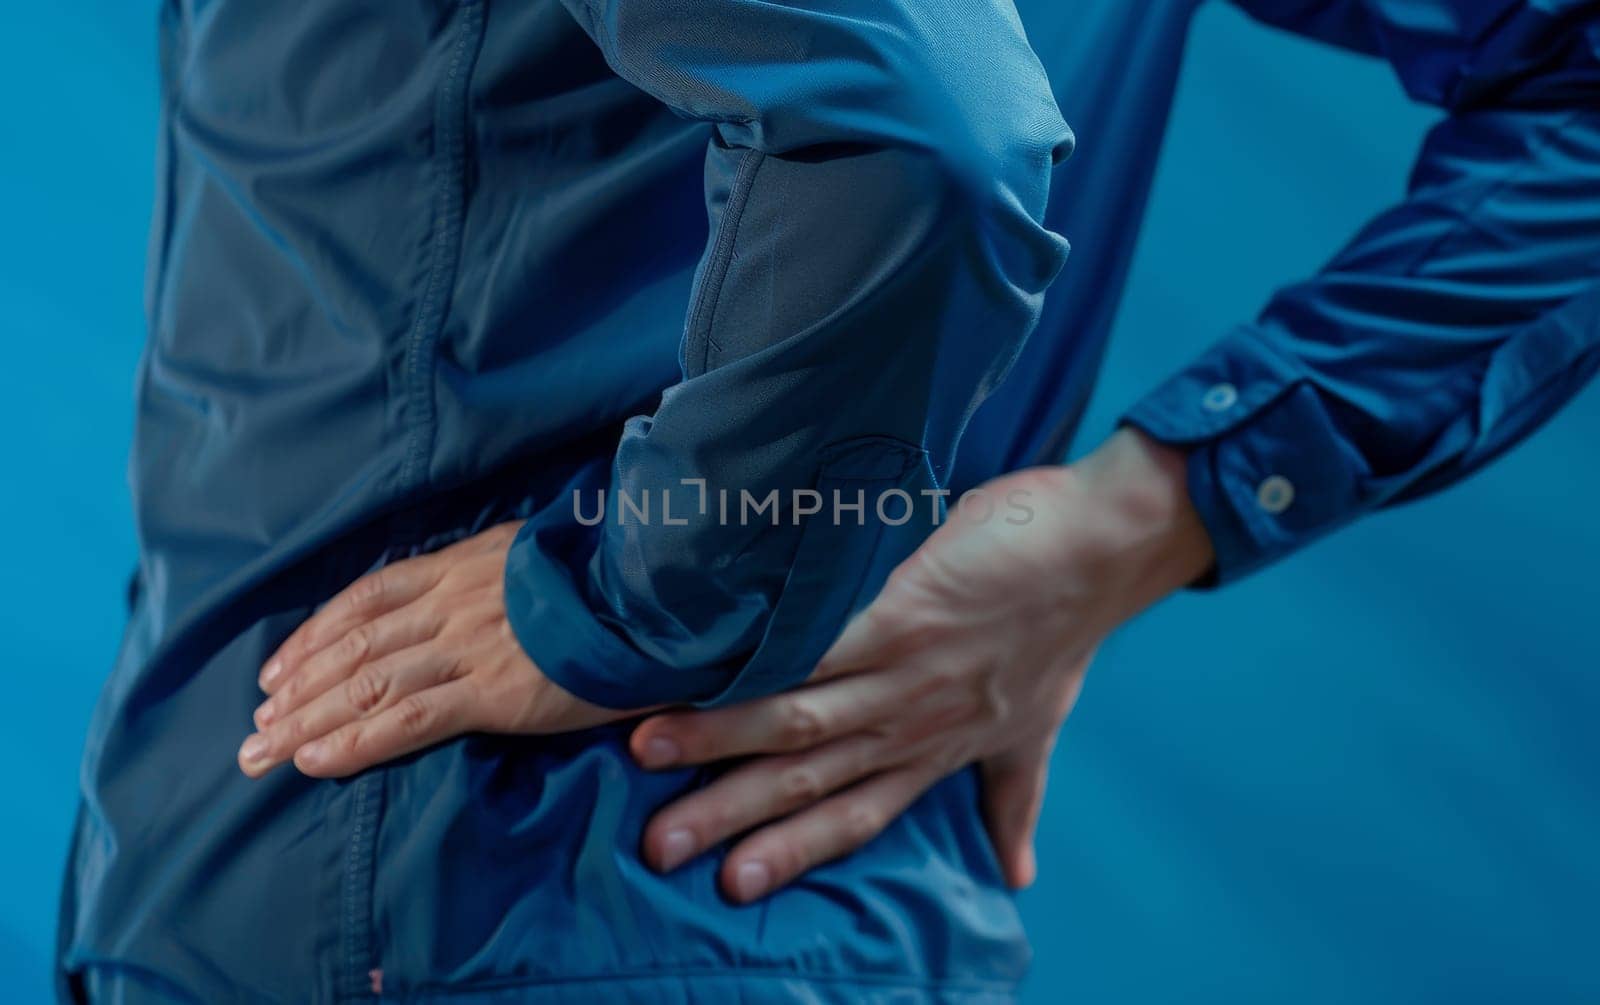 A person in pain, clutching their lower back. The image uses a clinical blue tone to symbolize chronic back pain and discomfort. by sfinks